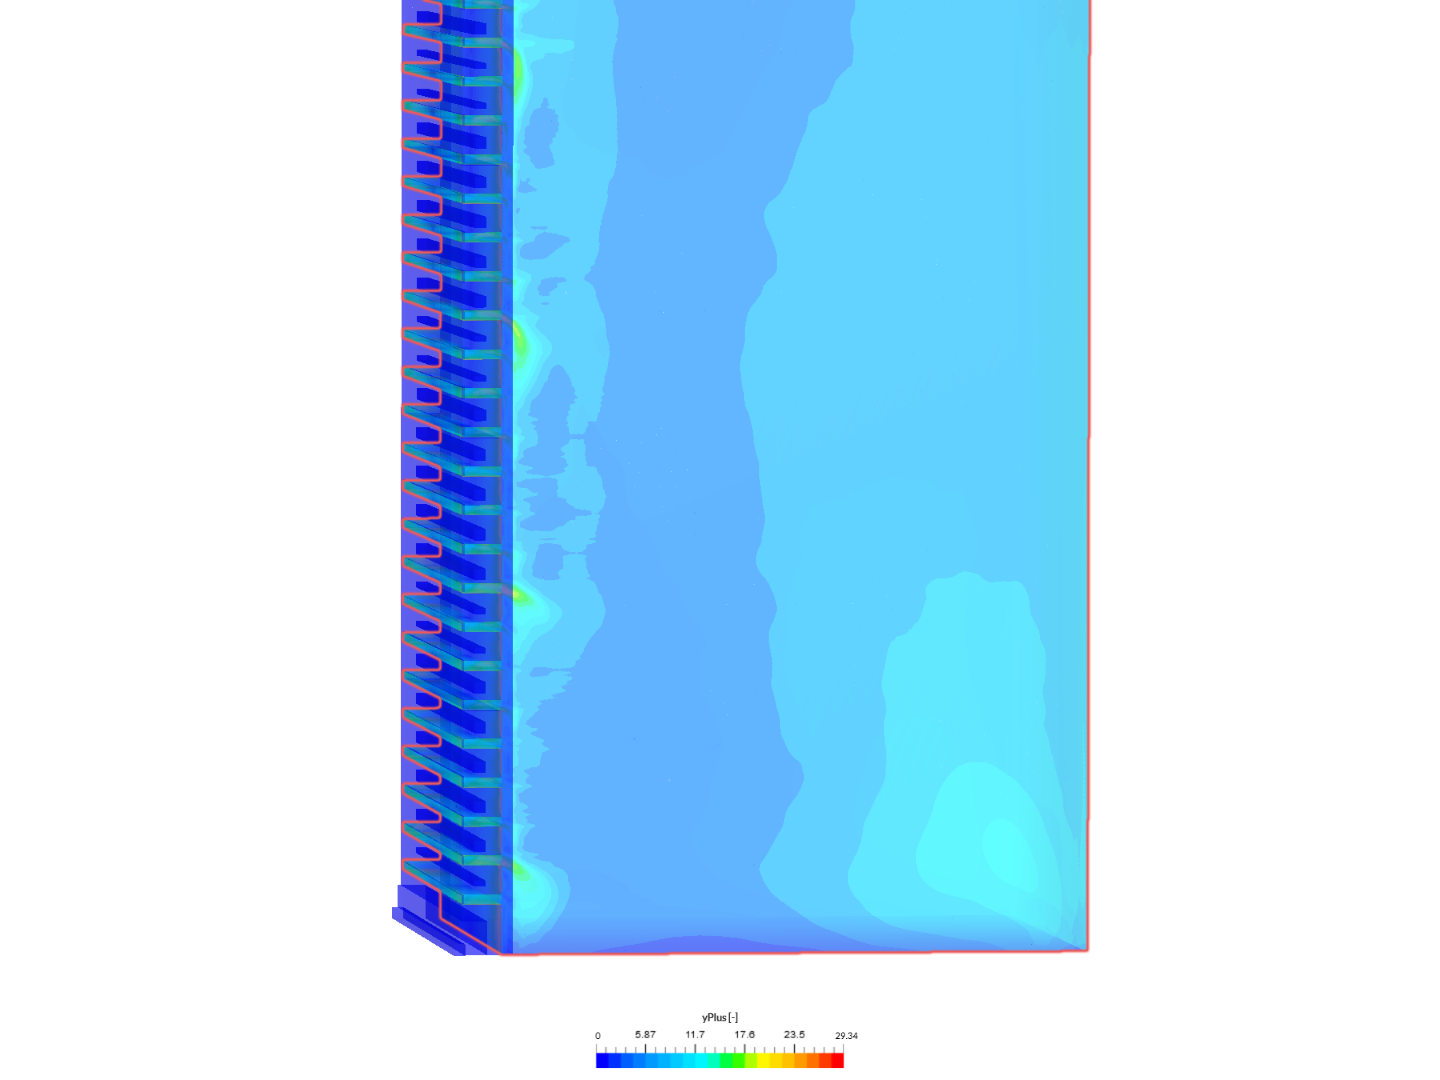 Mean surface pressure for buildings with balconies - Copy image